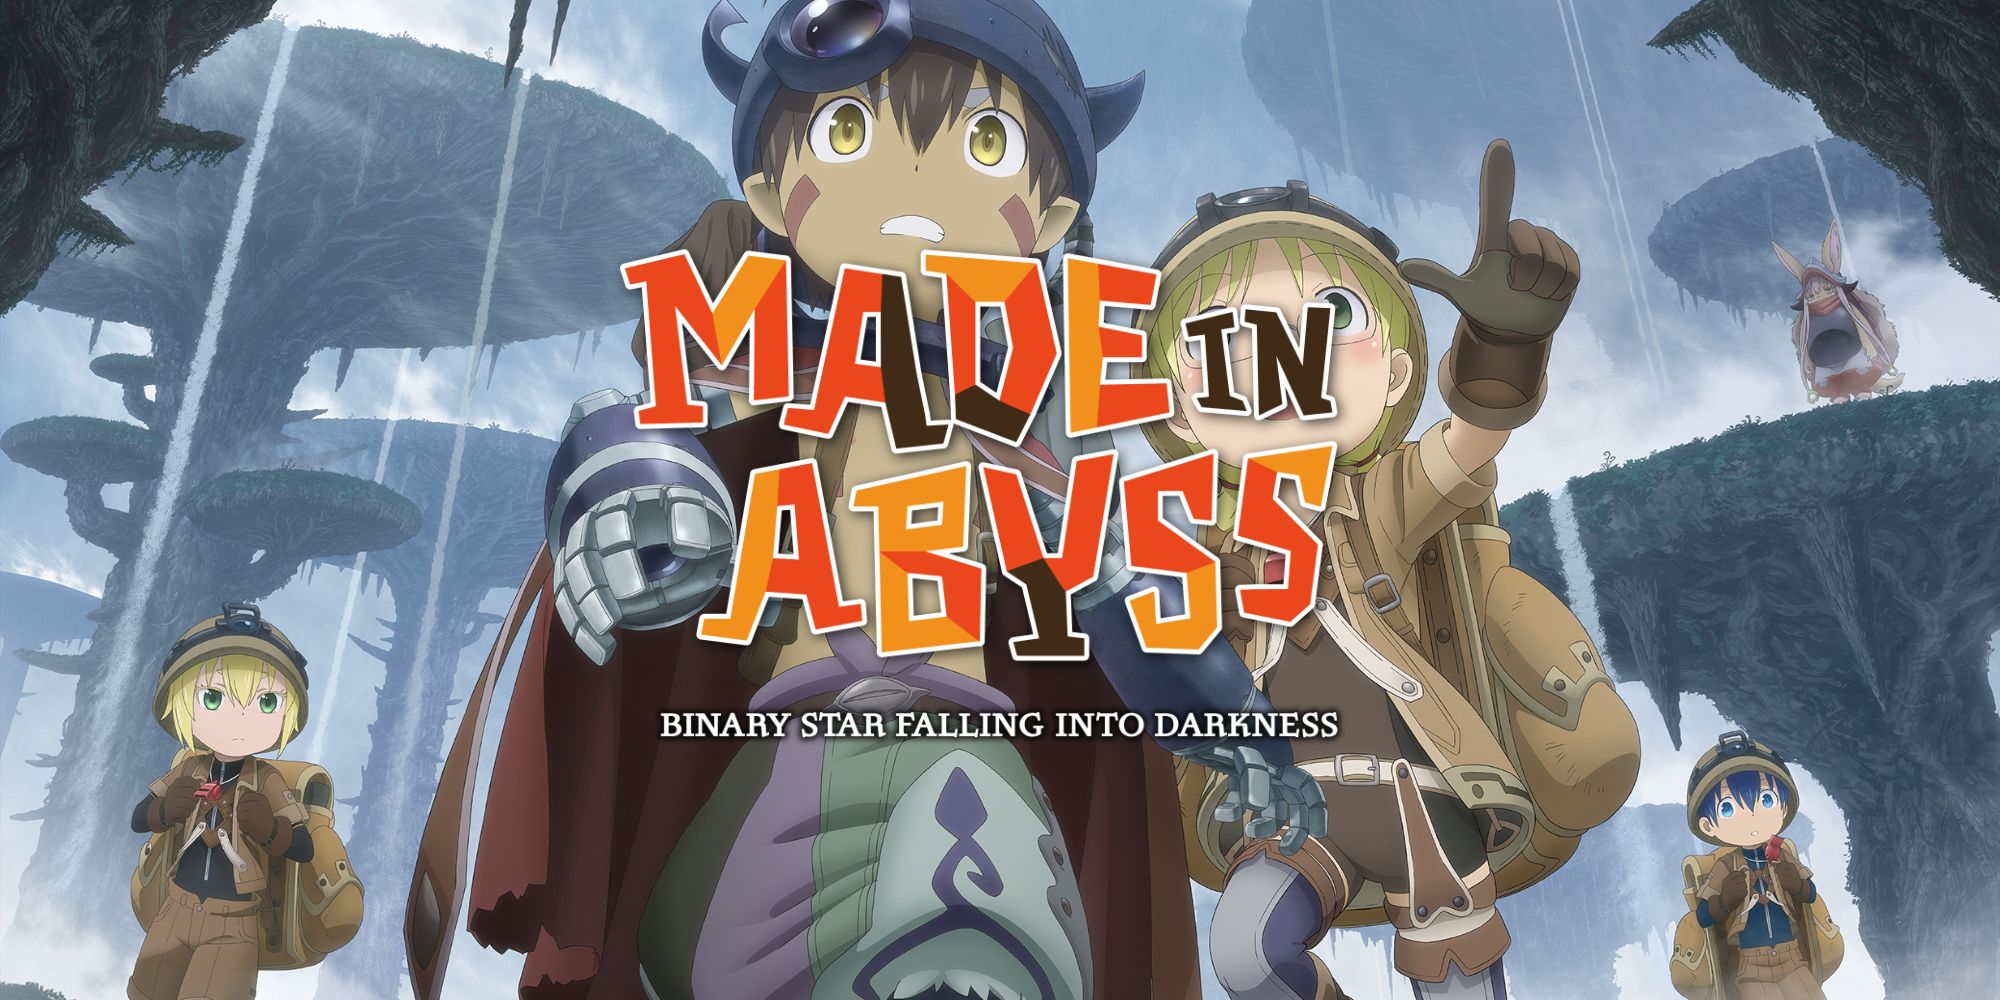 Made in Abyss- Binary Star Falling into Darkness Review main cast key art with title